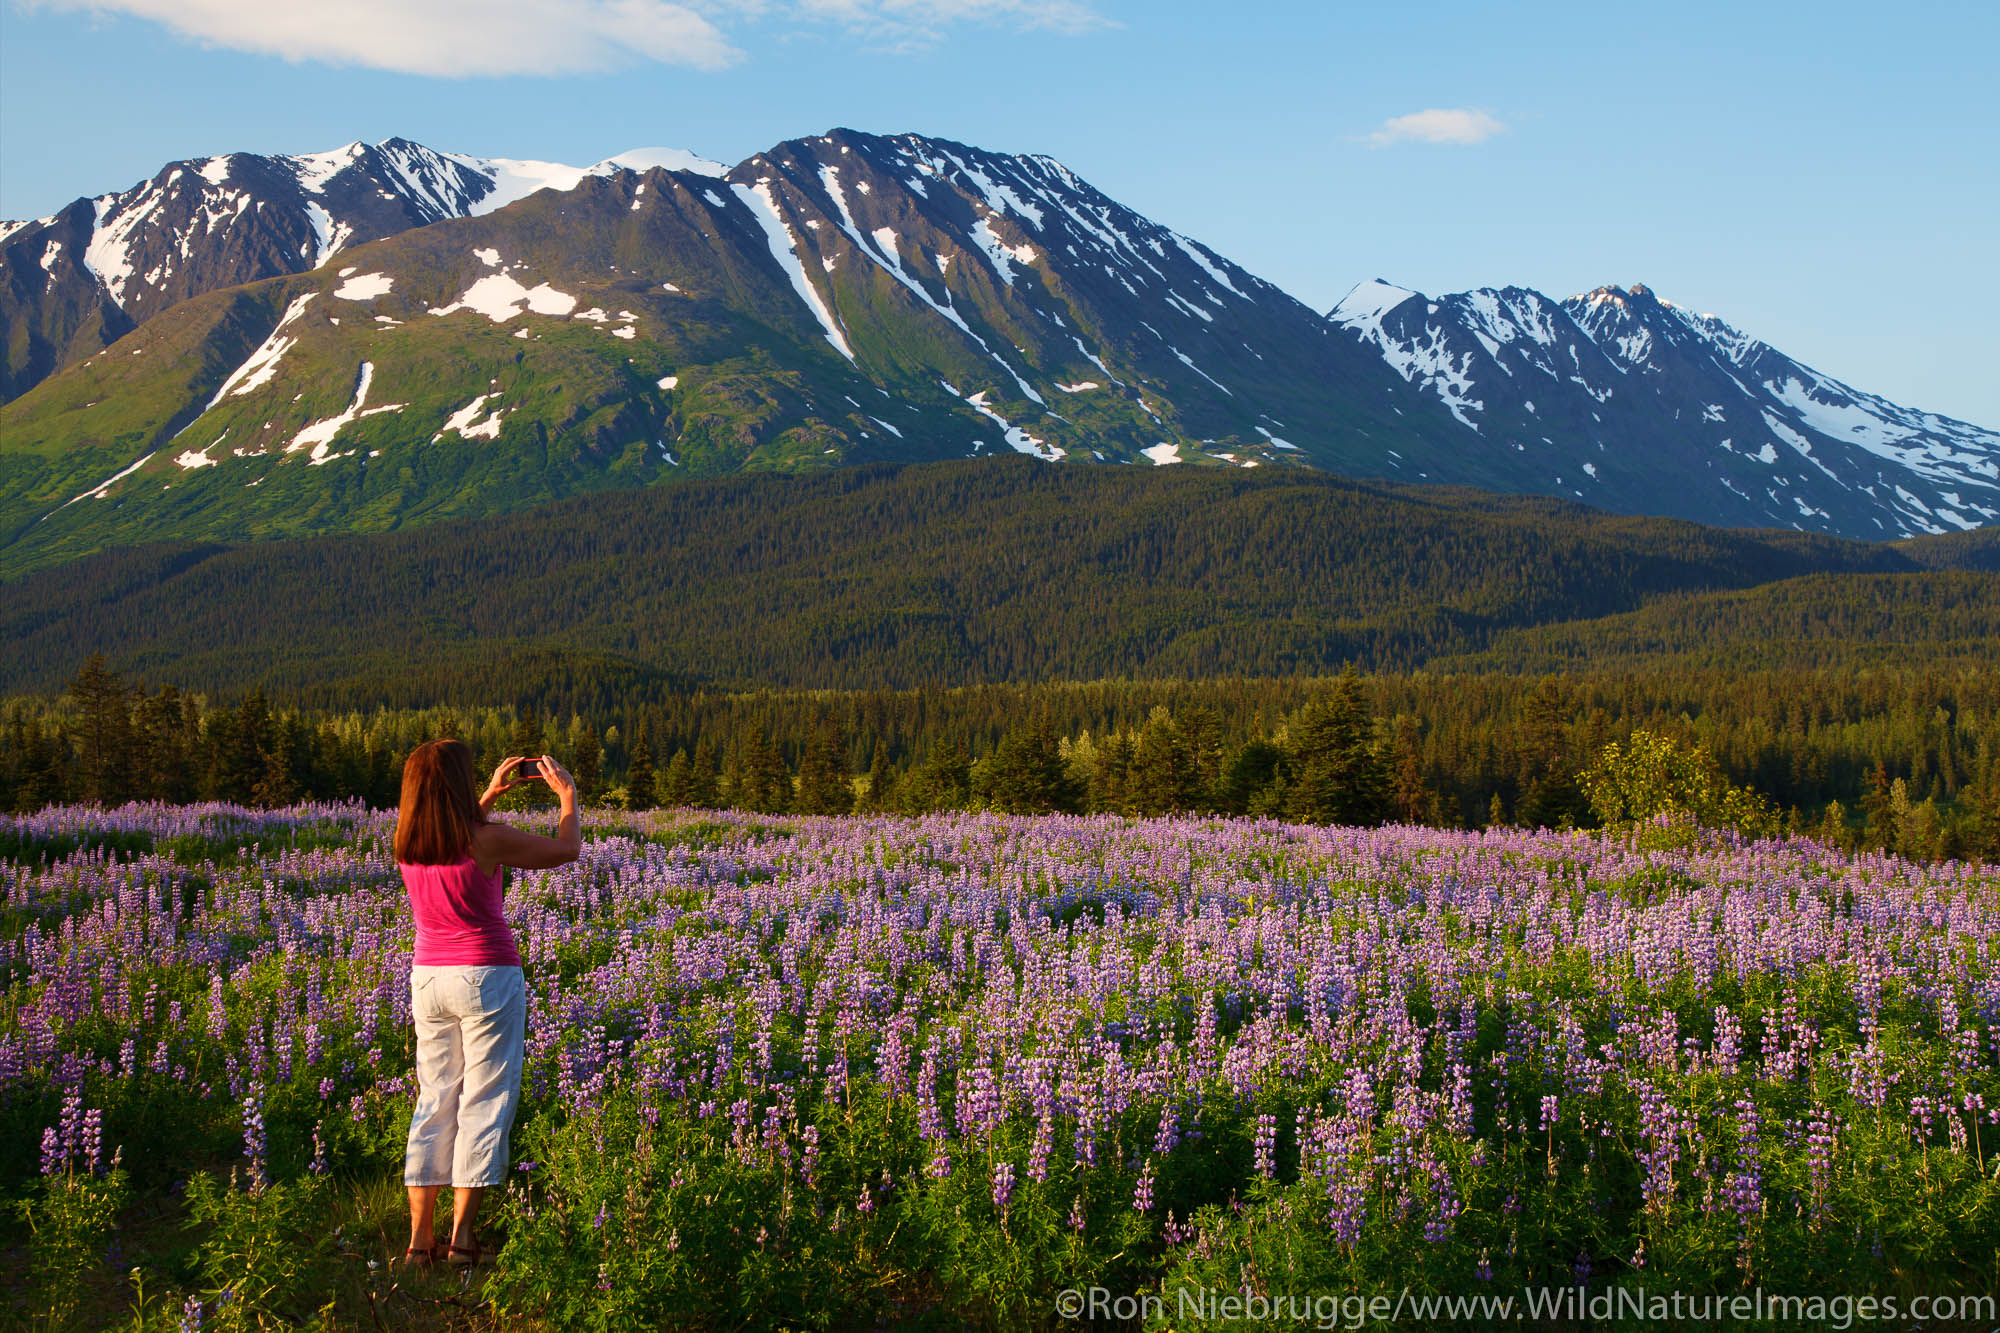 Visitor takes a photo with an iPhone, Chugach National Forest, Alaska.  (model released)